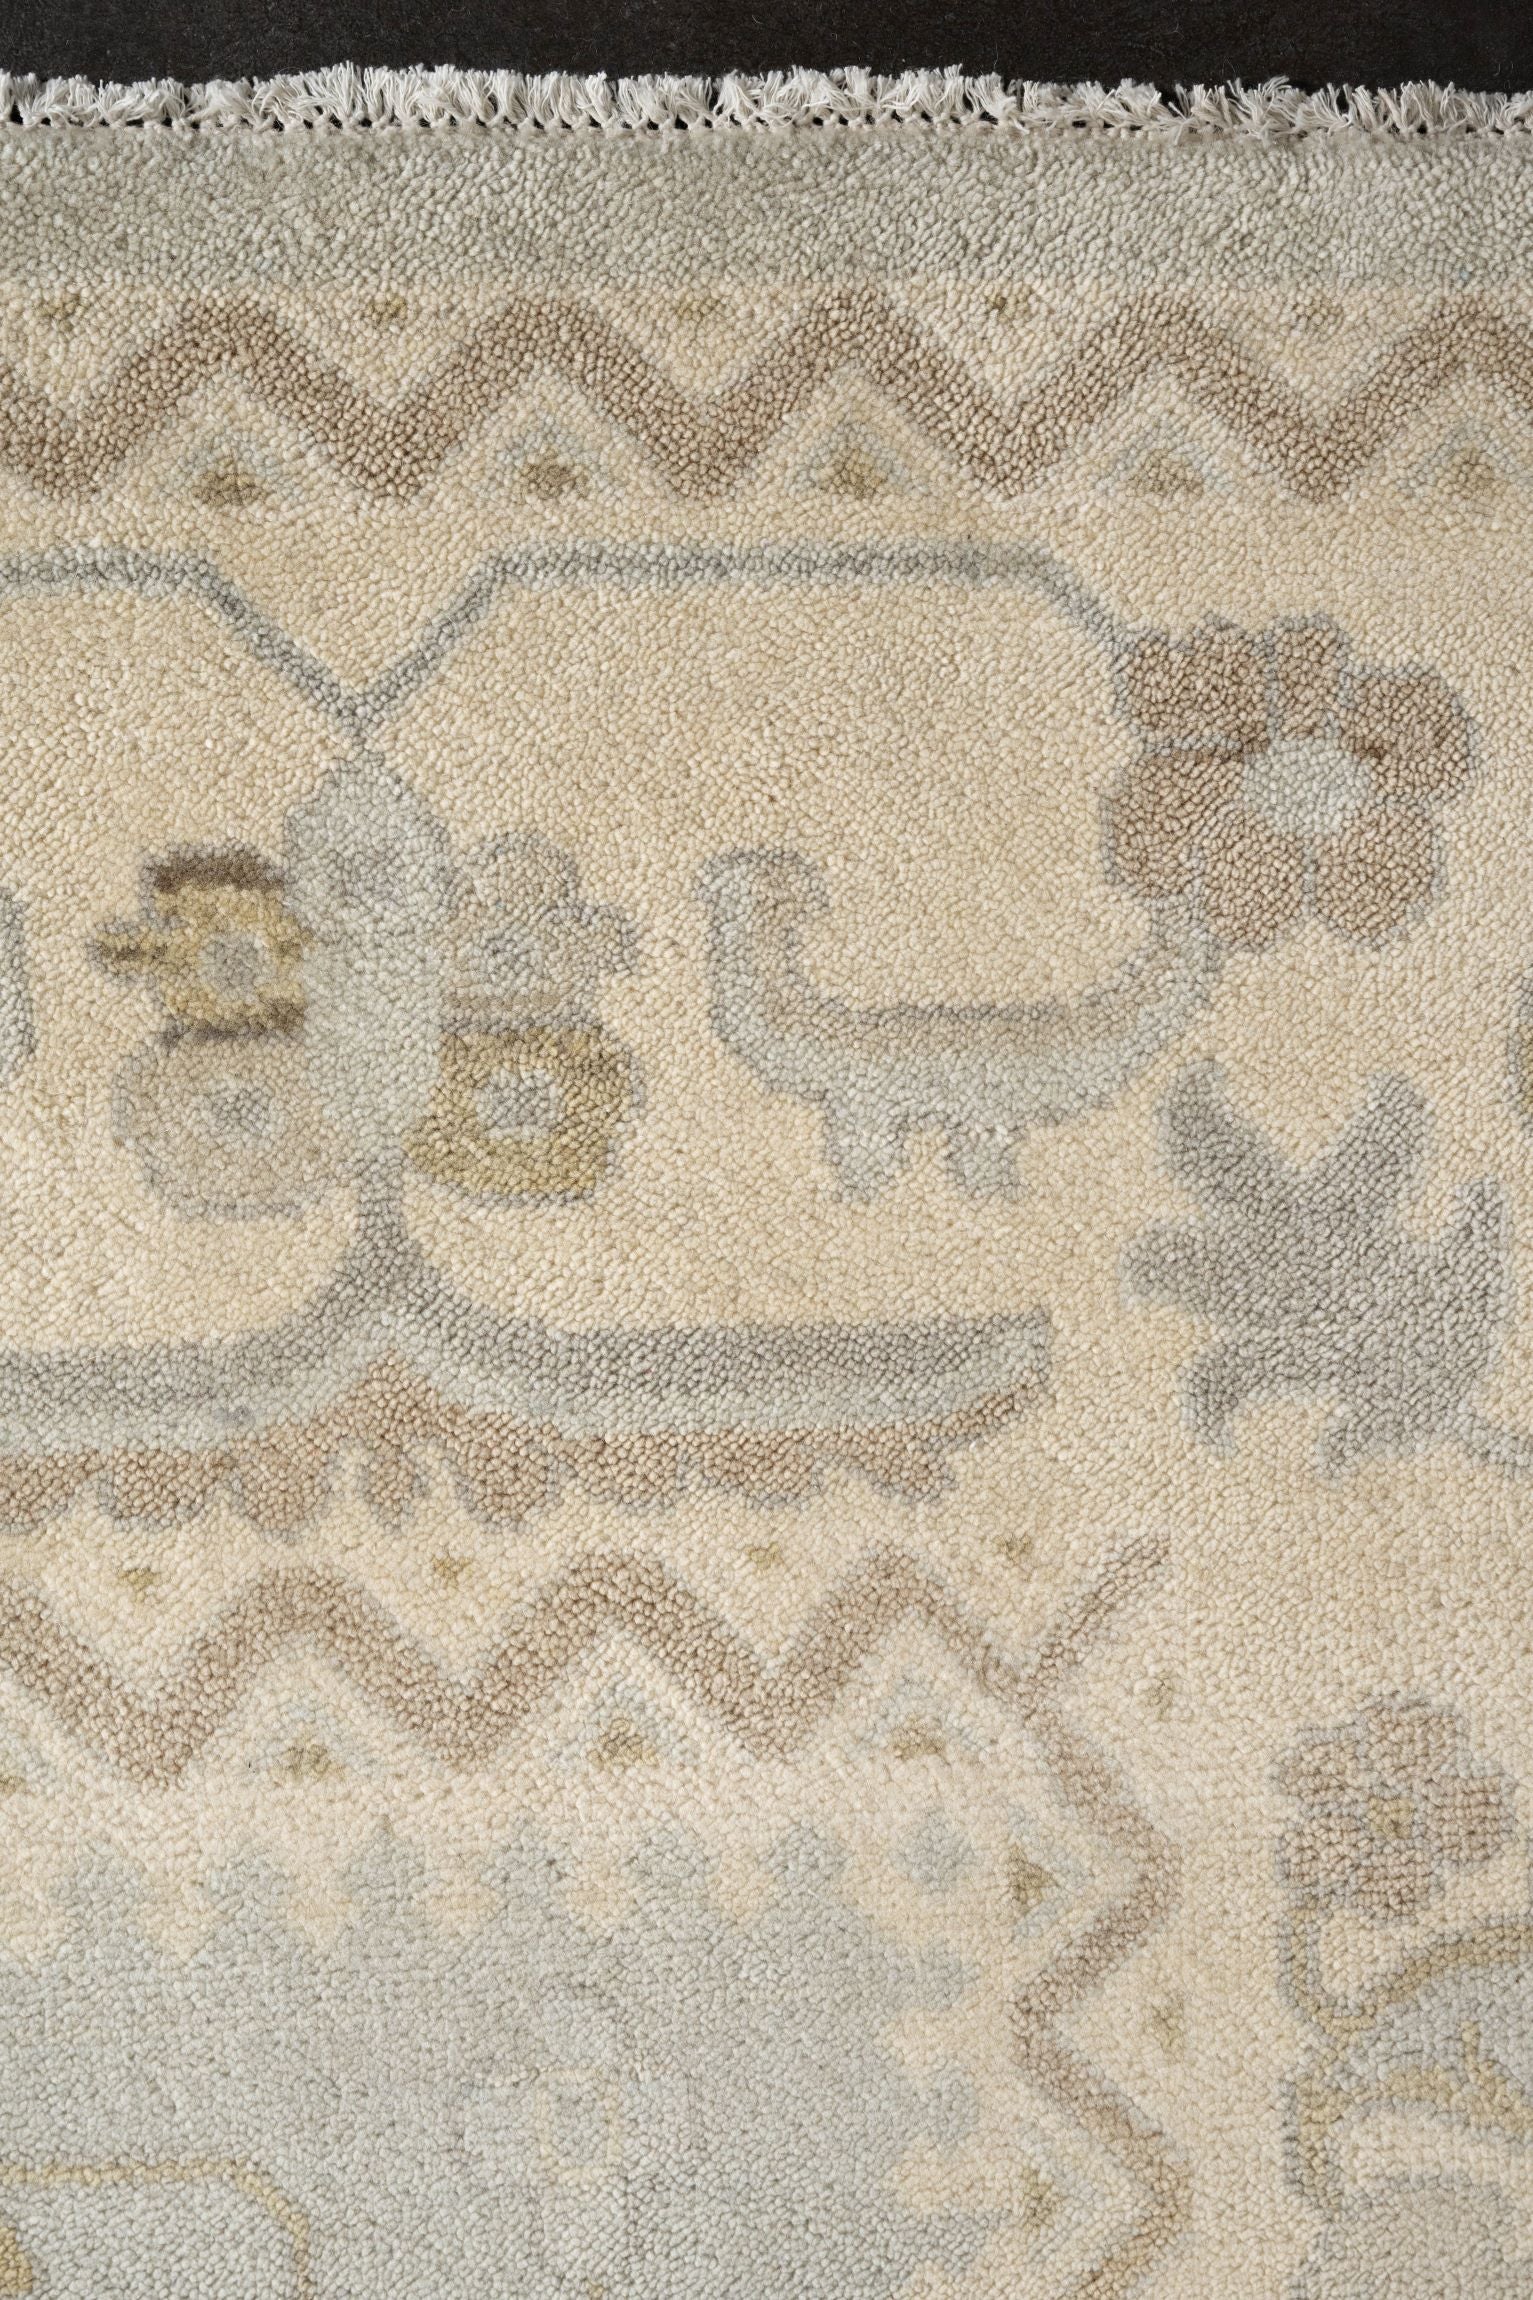 Neutral toned and hand-knotted Oushak style rug made of 100% New Zealand wool. This rug is comprised of tan, beige, brown, gray, and blue colors.